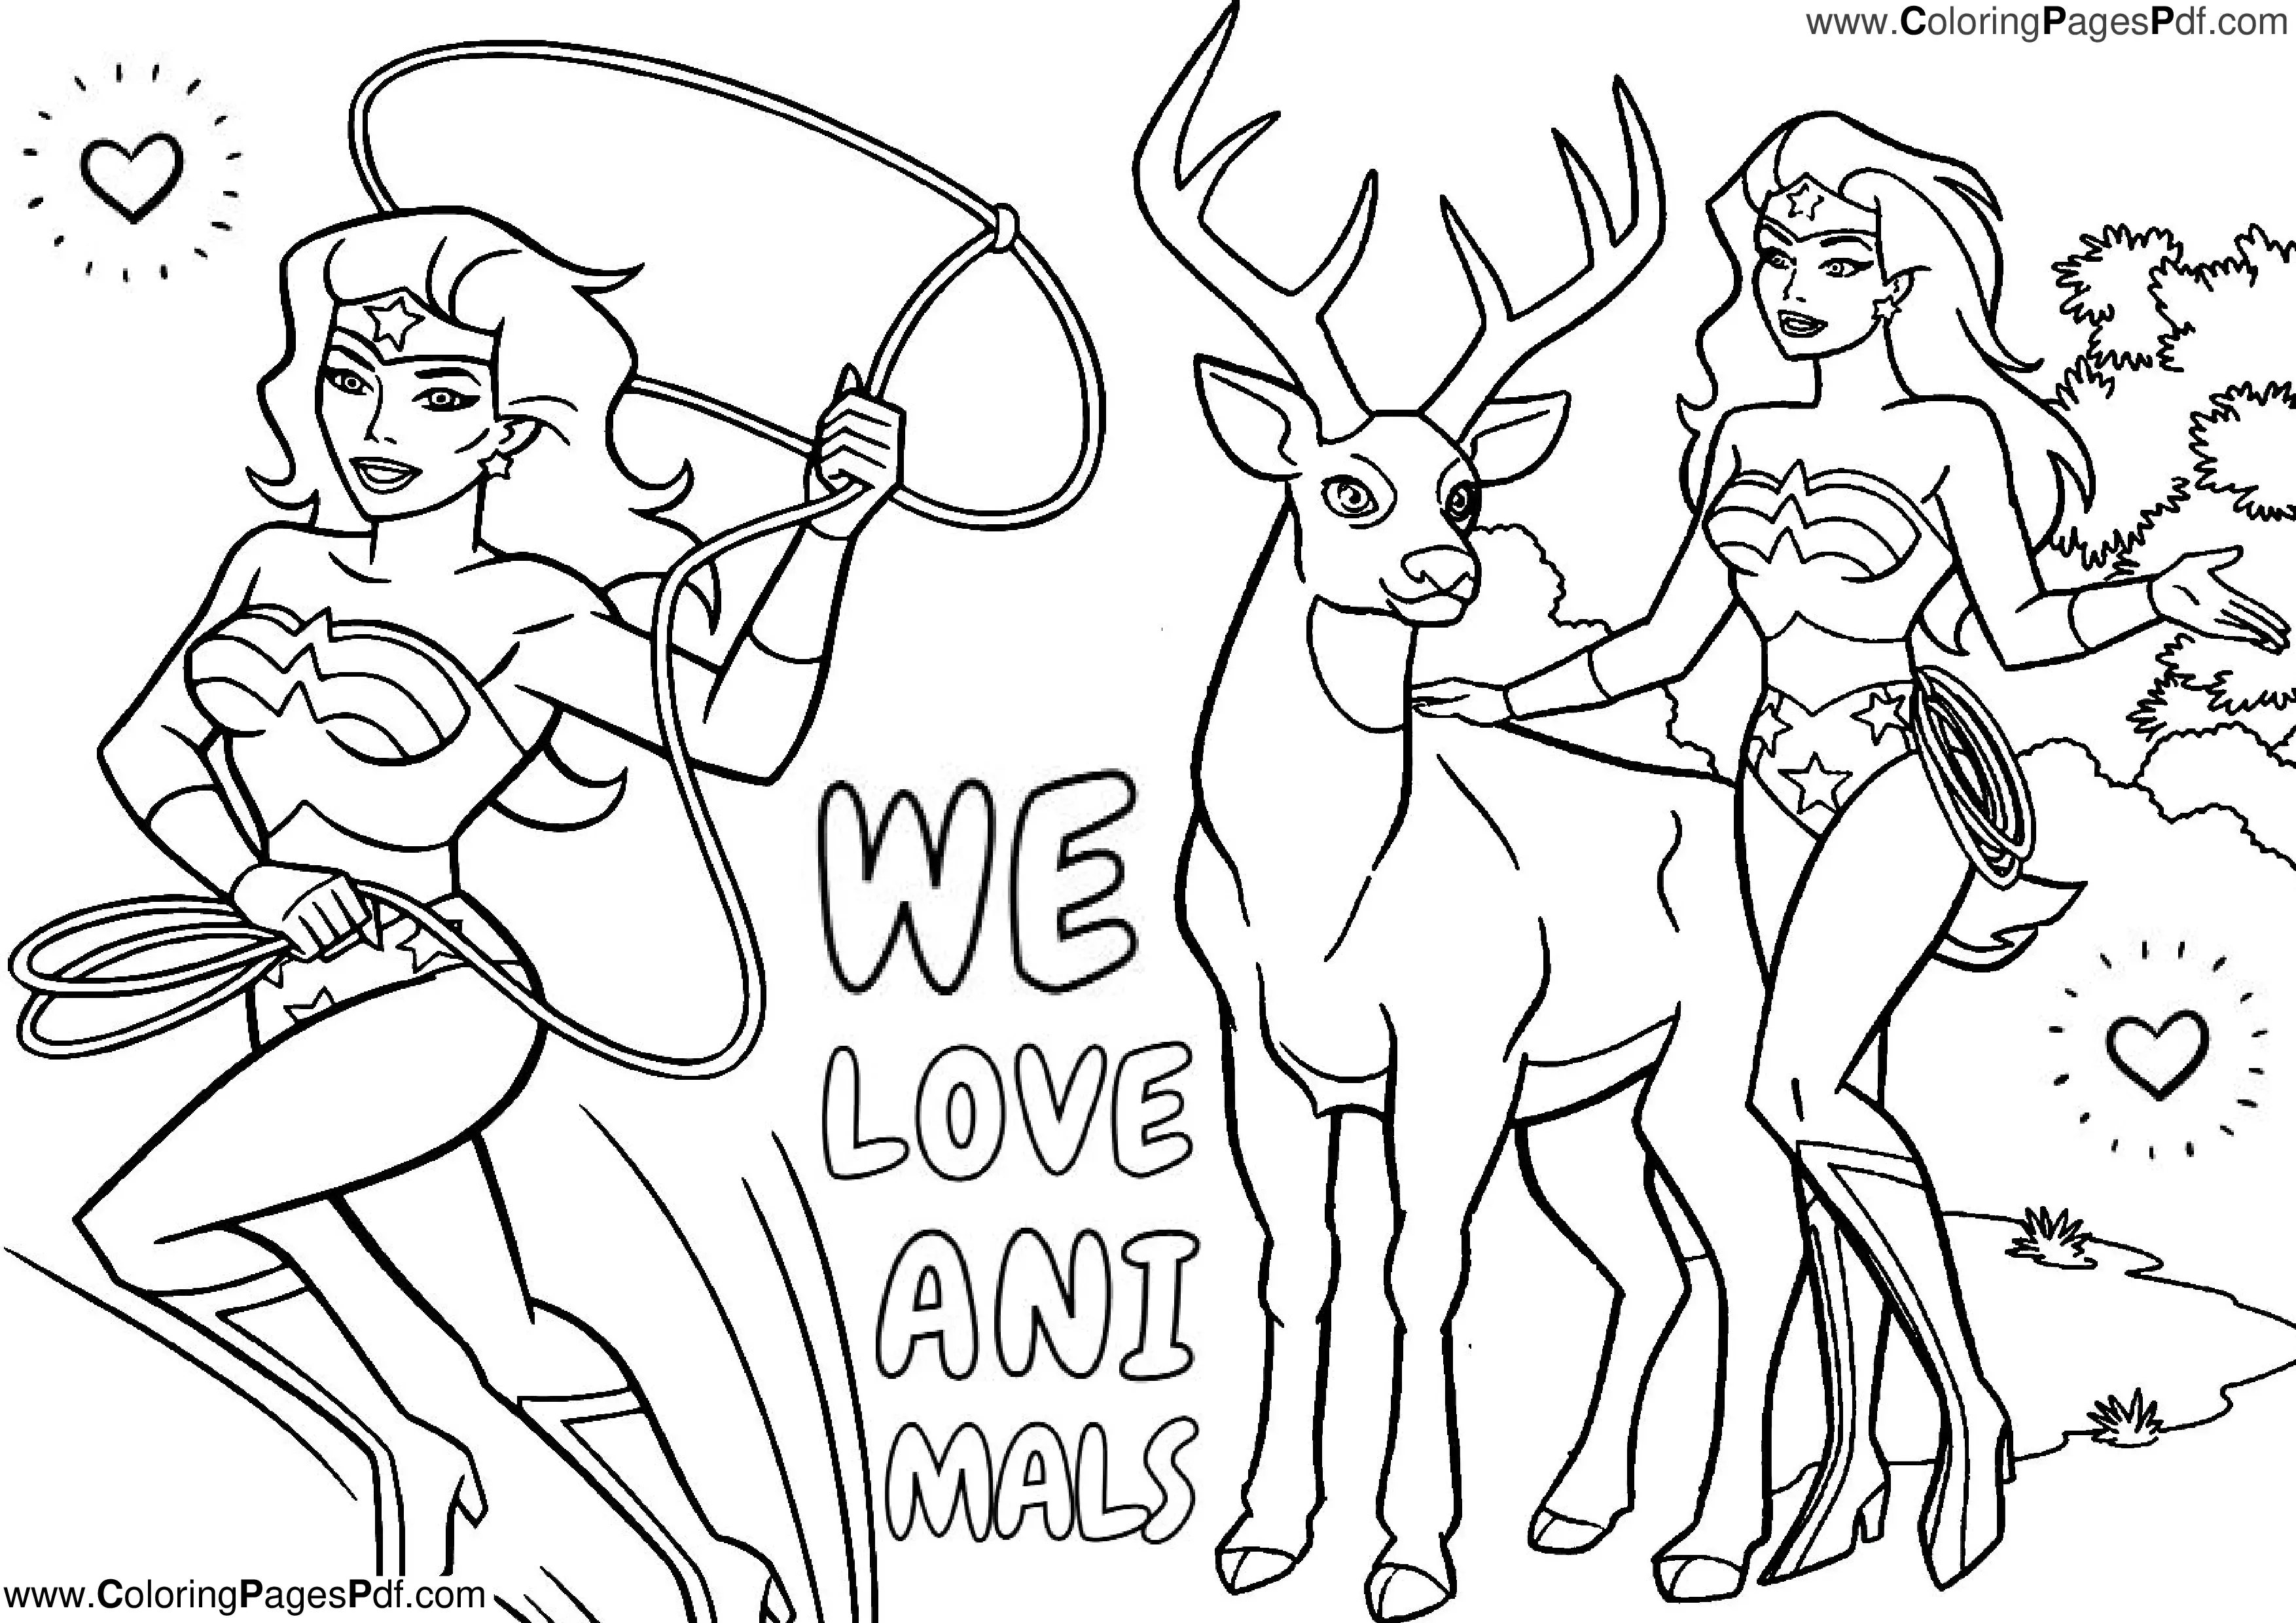 Free wonder woman coloring pages